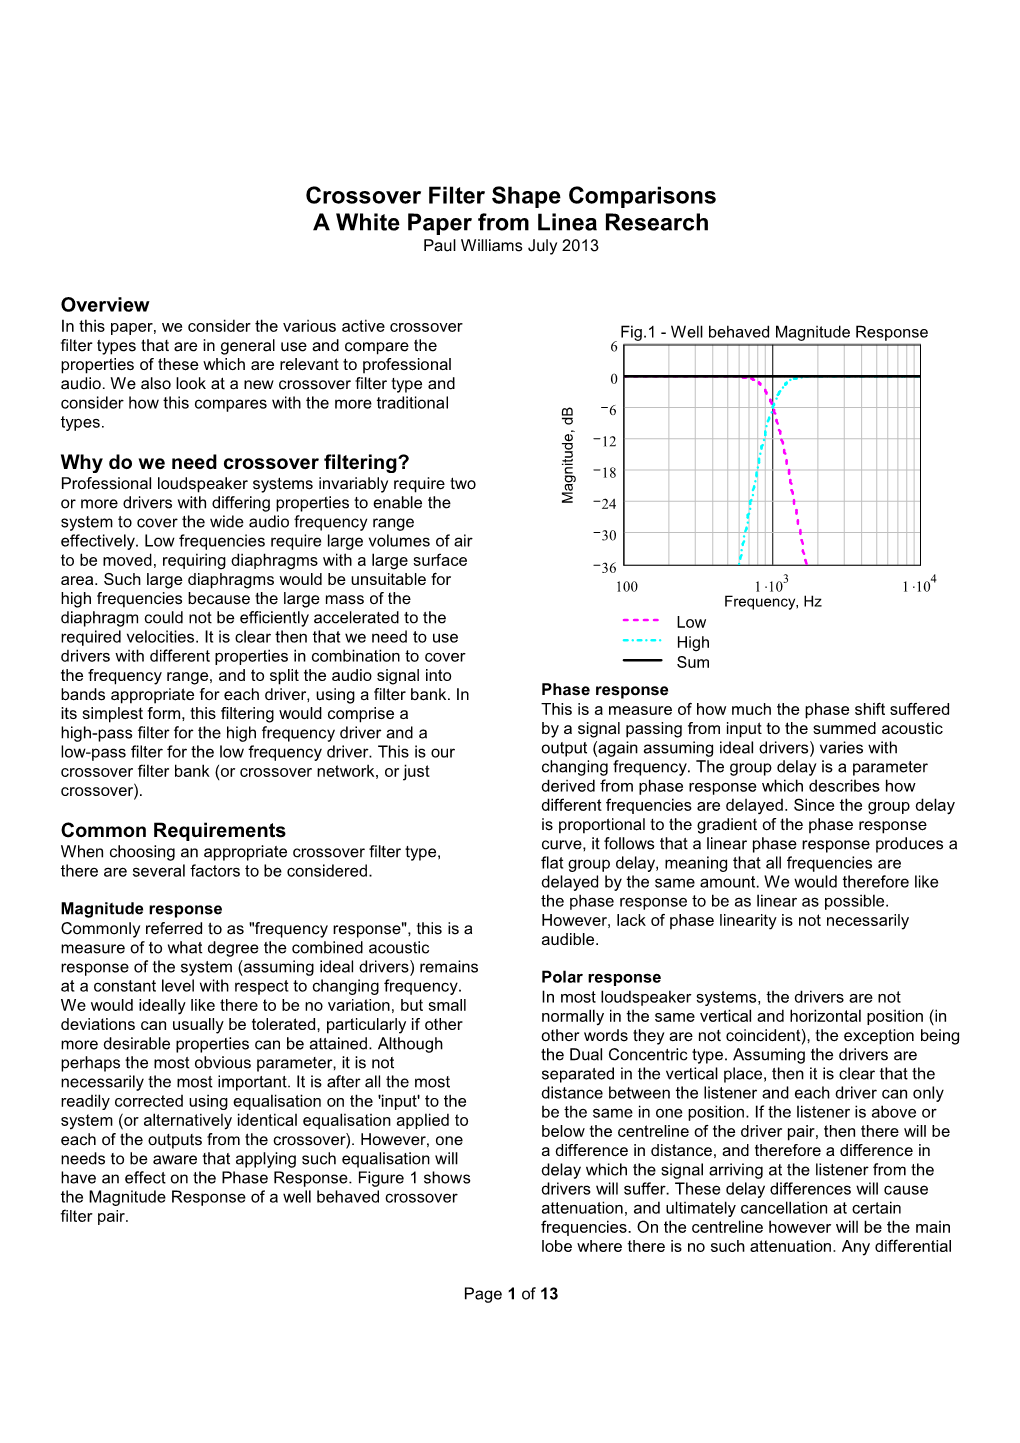 Crossover Filter Shape Comparisons a White Paper from Linea Research Paul Williams July 2013